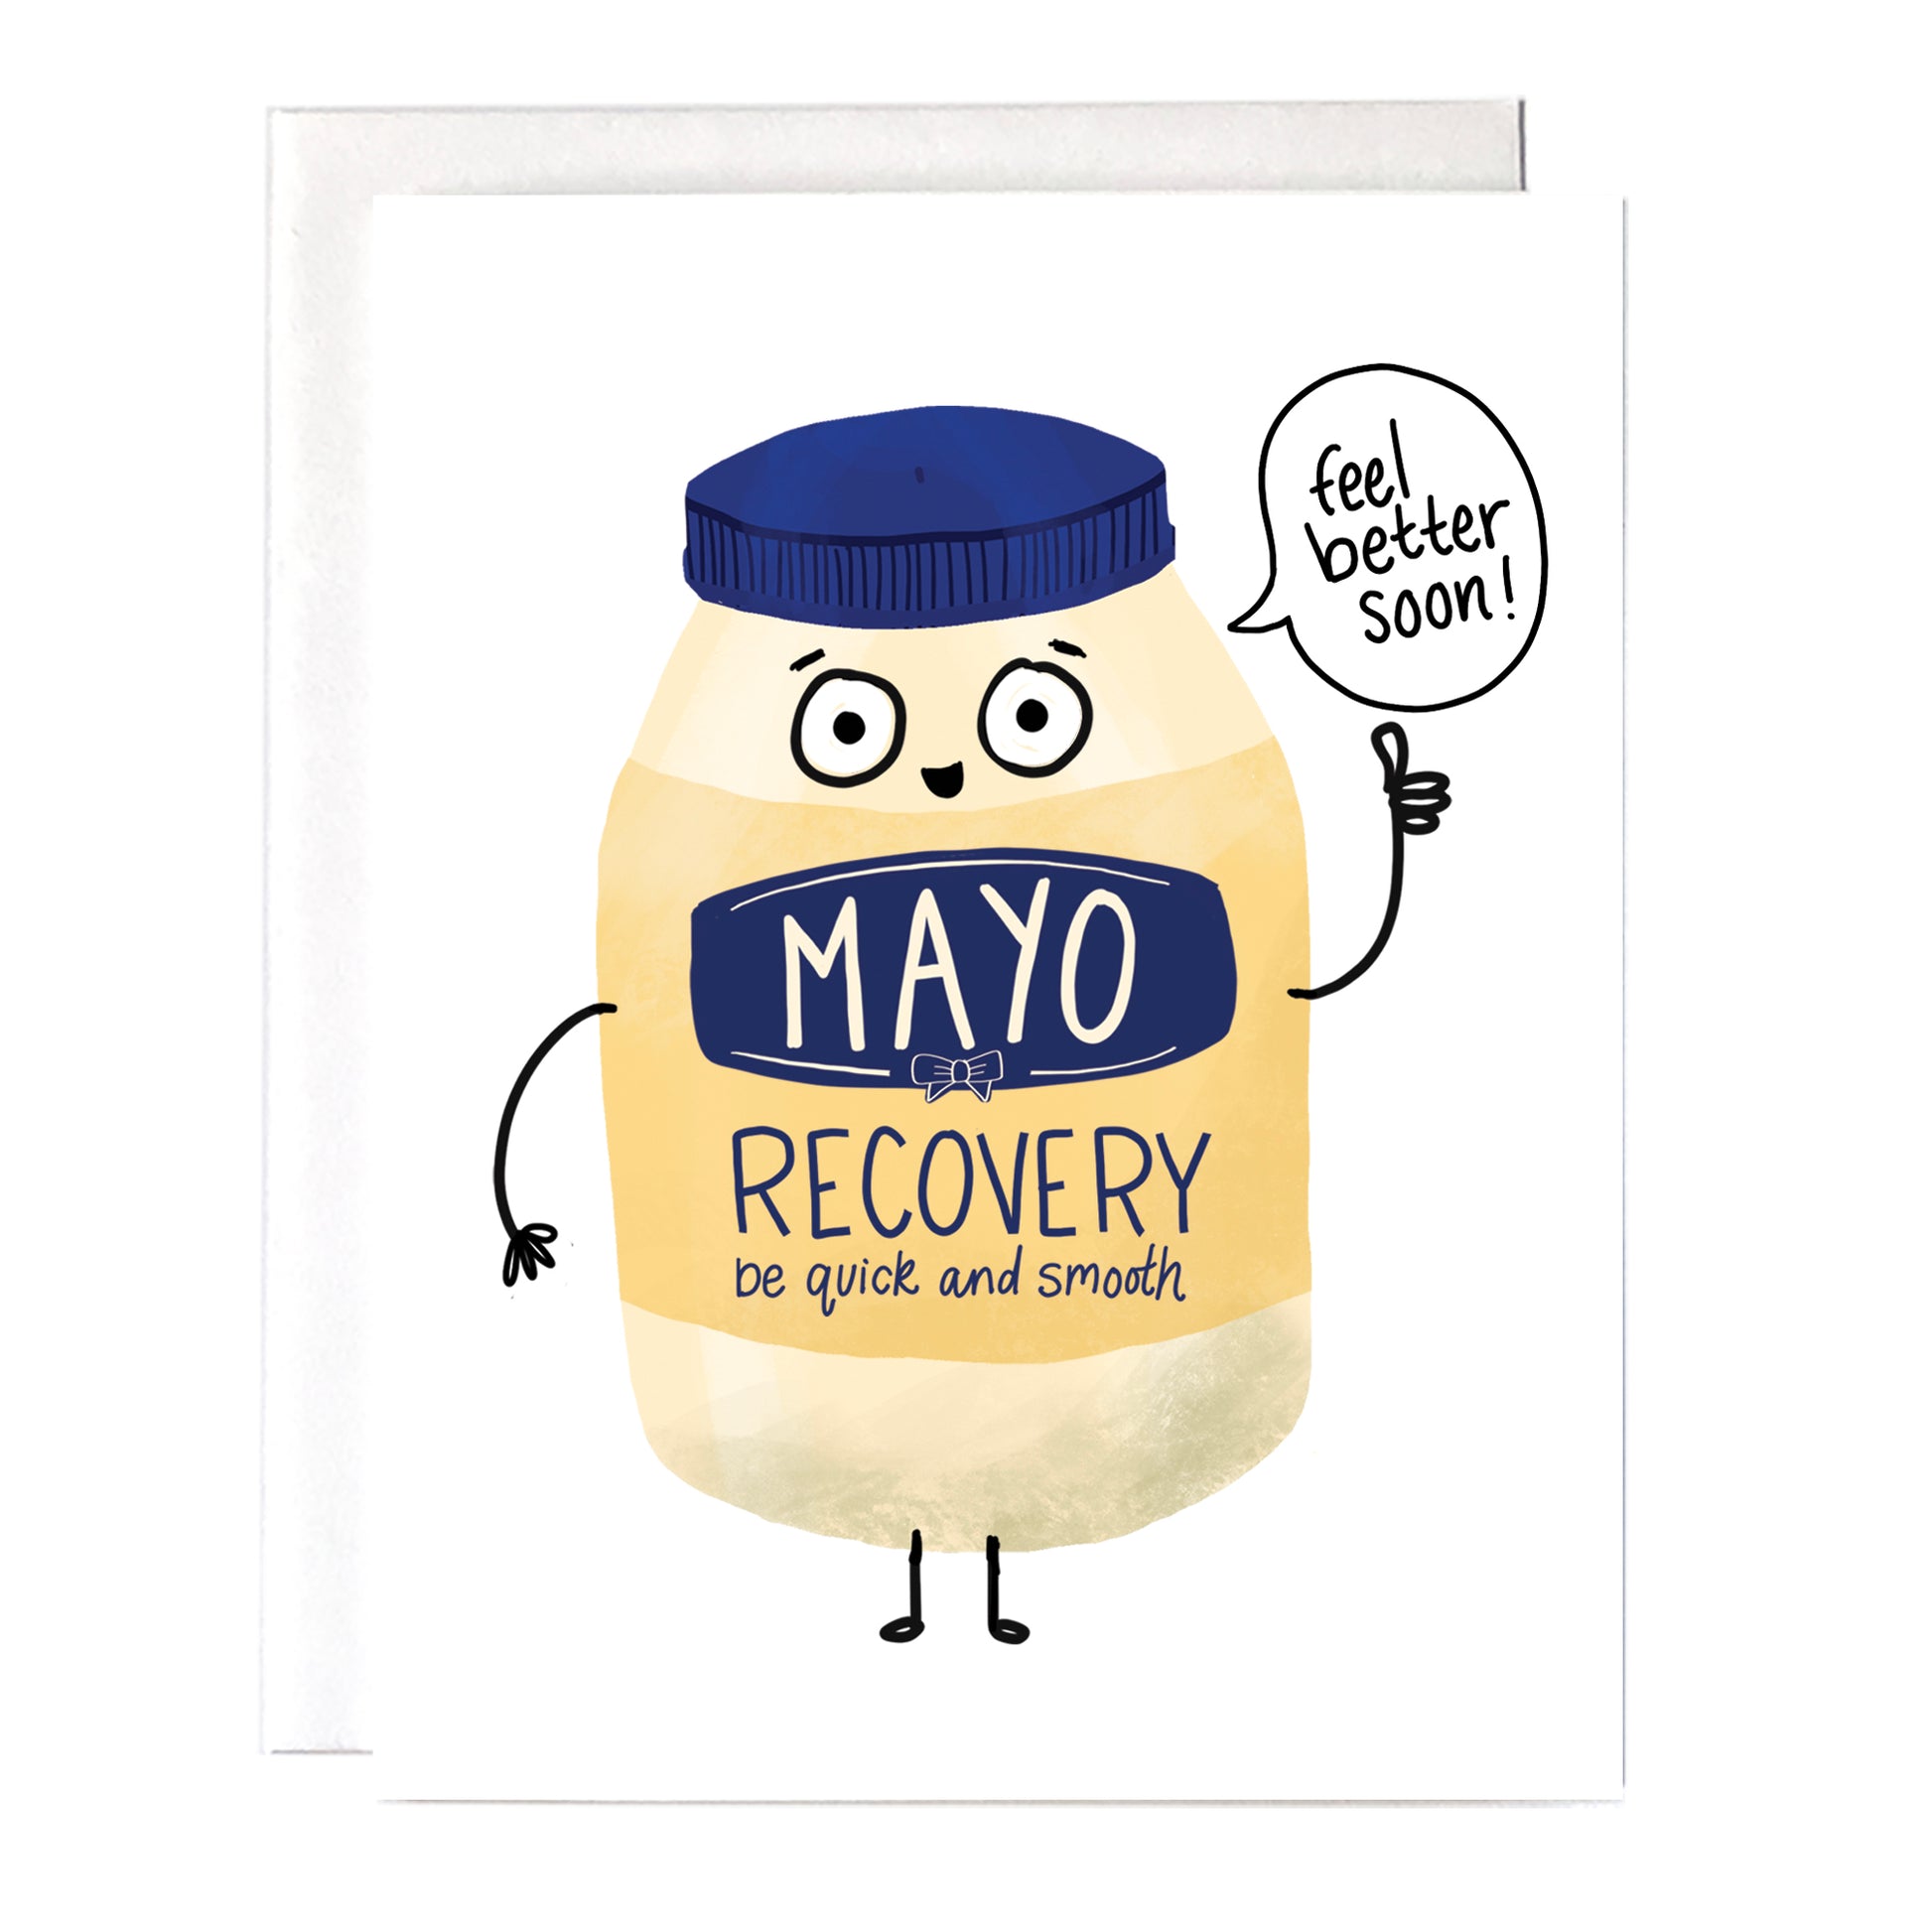 This cute mayo jar is a great way to send get well soon wishes to someone who is recovering from an illness or surgery. Size A2 greeting card (4.25" x 5.5") with envelope, blank Inside. All cards are designed and Illustrated with love by me, Anna Fox, and are printed in Denver, CO.